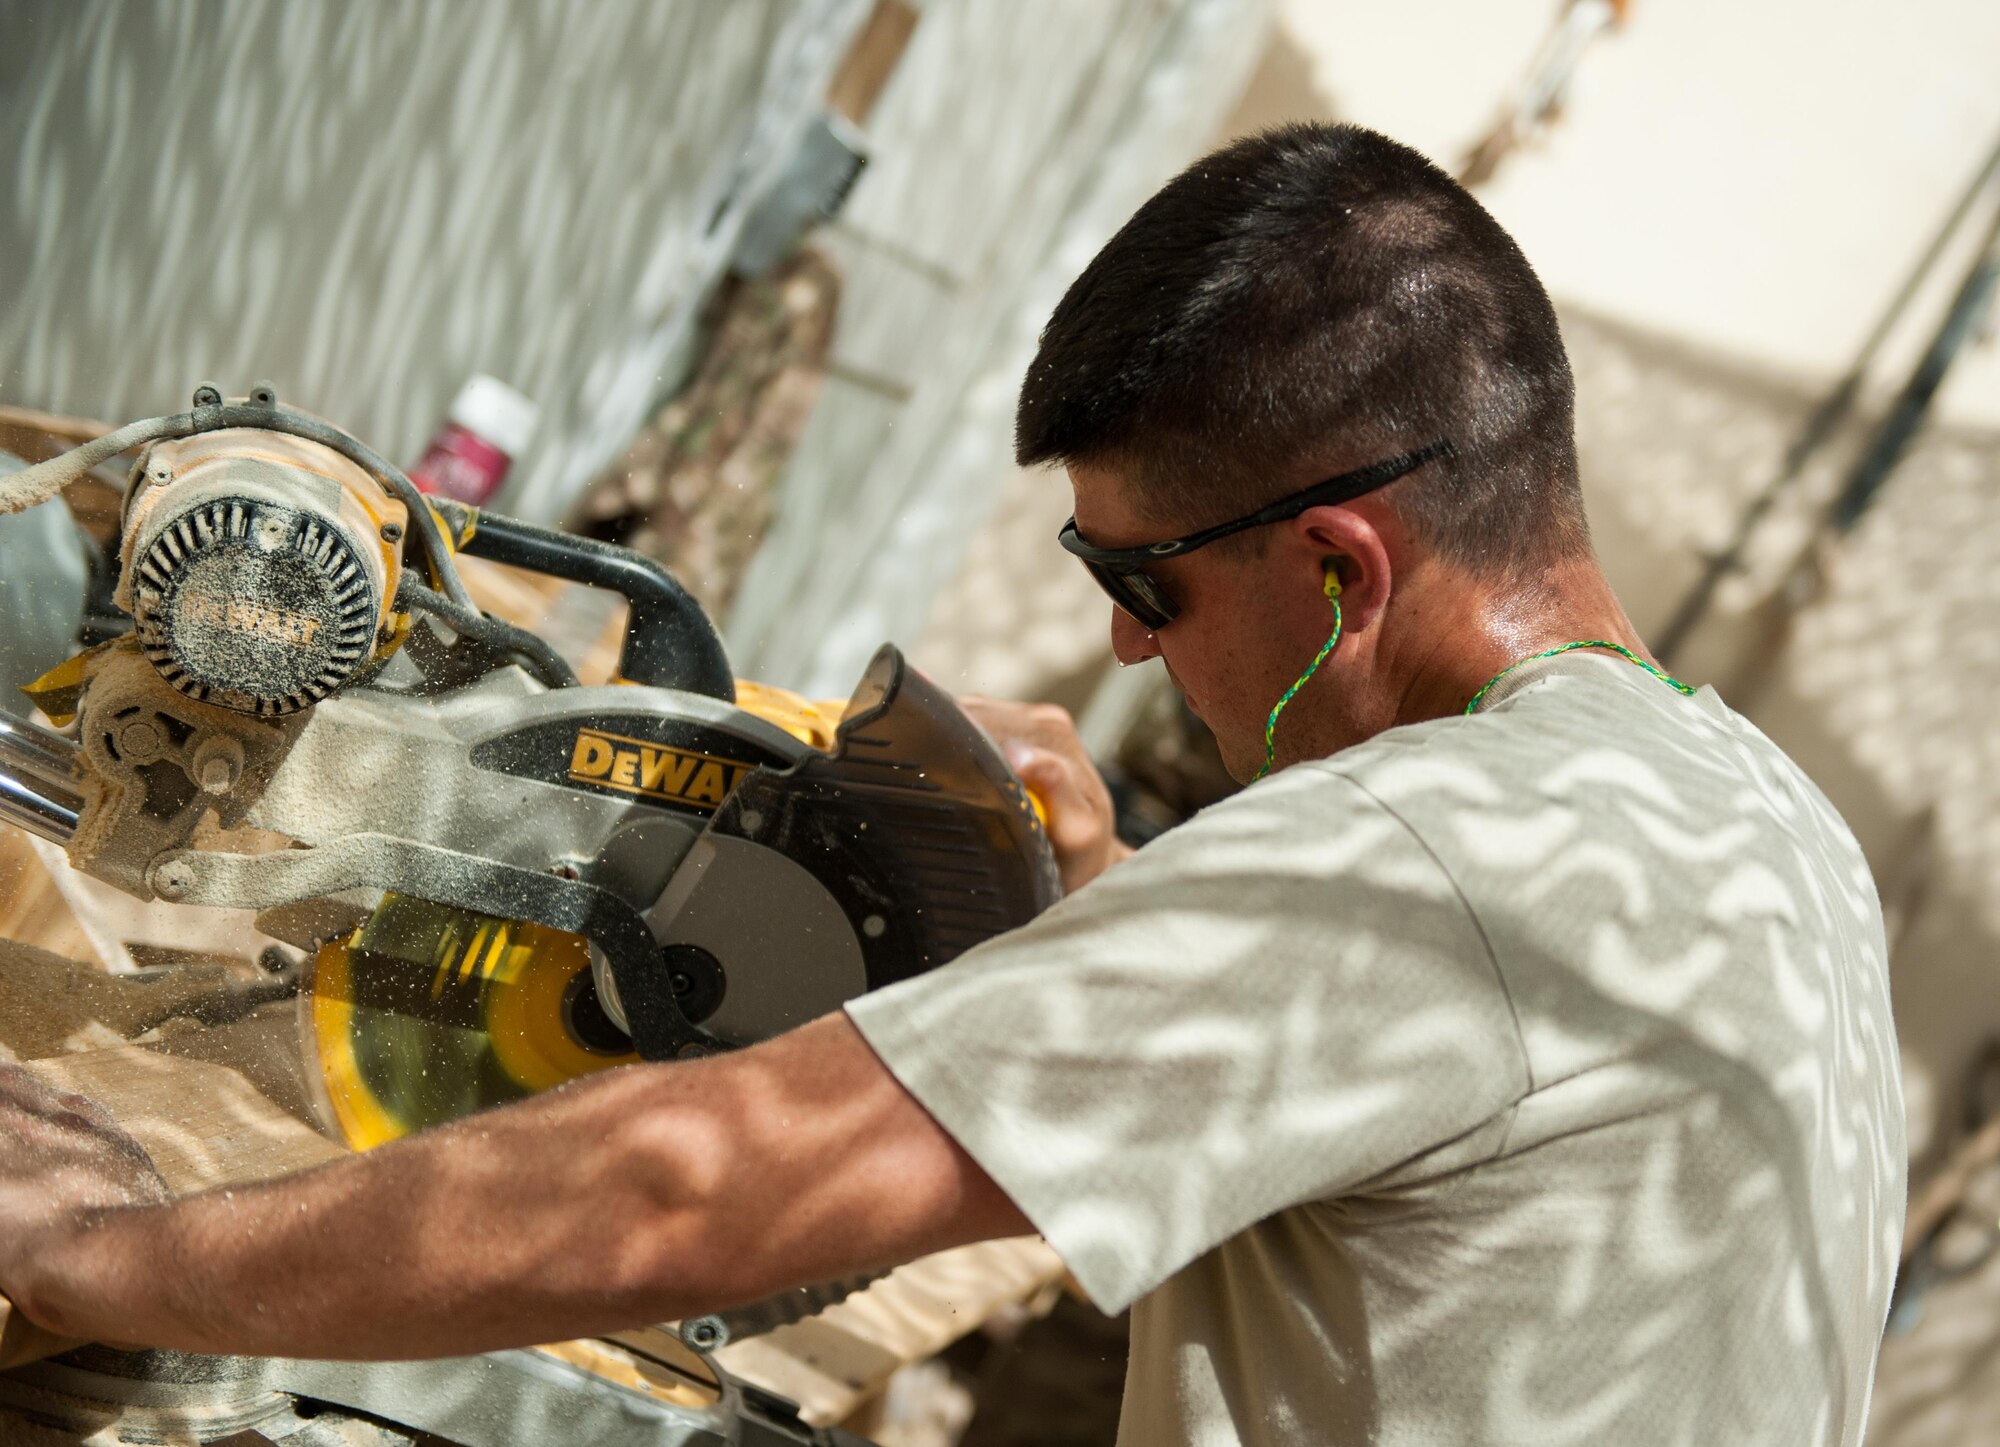 U.S. Air Force Tech. Sgt. Dallan Livingston, 451st Expeditionary Support Squadron Central Command Material Recovery Element air transportation specialist, builds a set of stairs for a defensive fighting position at Kandahar Airfield, Afghanistan, Aug. 15, 2015.  Livingston has been using his carpentry skills during his spare time to build projects to better KAF. (U.S. Air Force photo by Tech. Sgt. Joseph Swafford/Released)